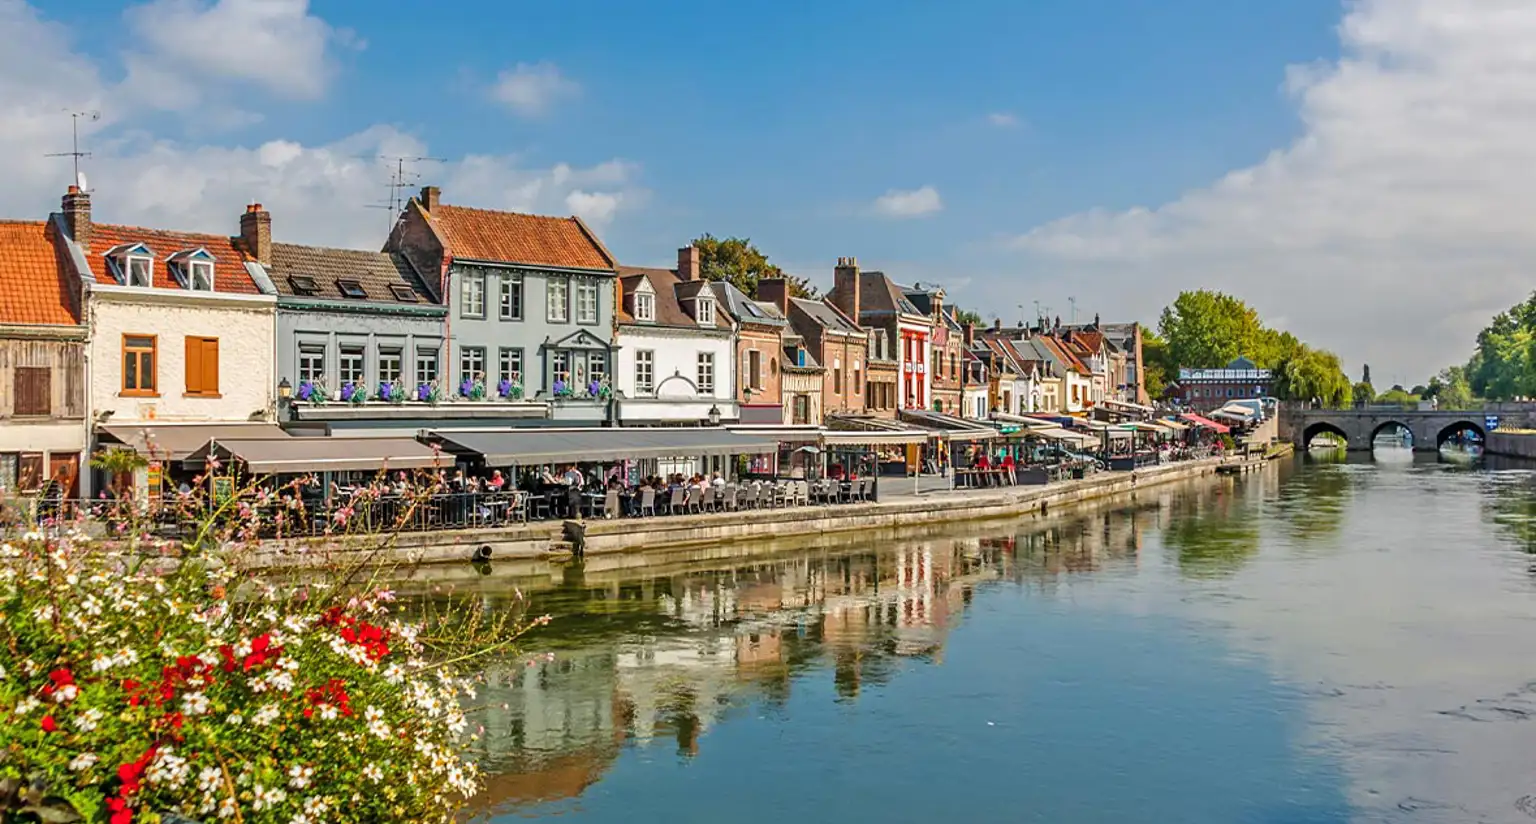 The LeShuttle guide to Amiens